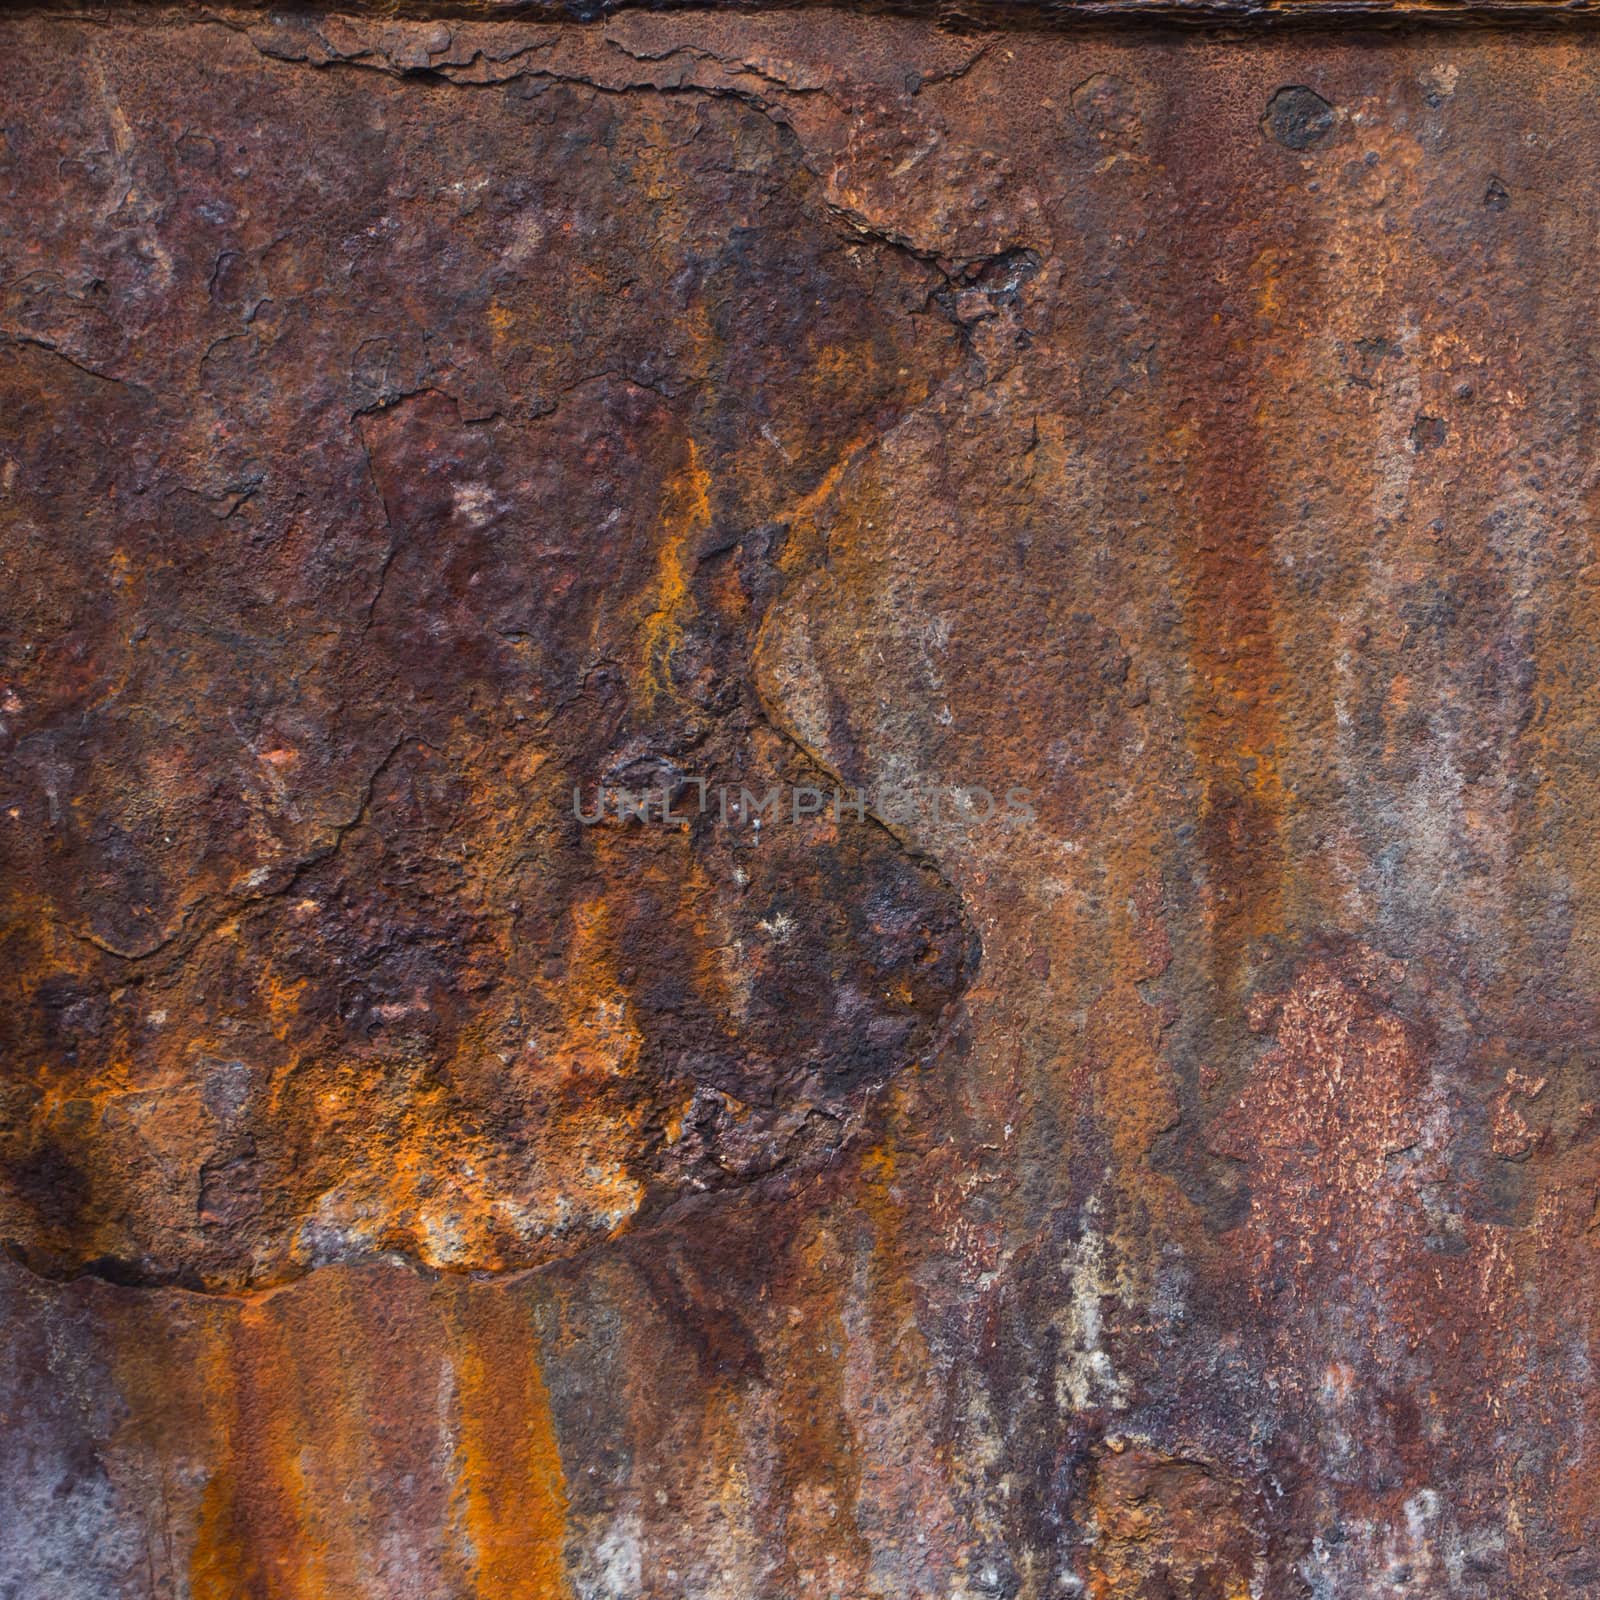 Rusty metal for background  by wyoosumran